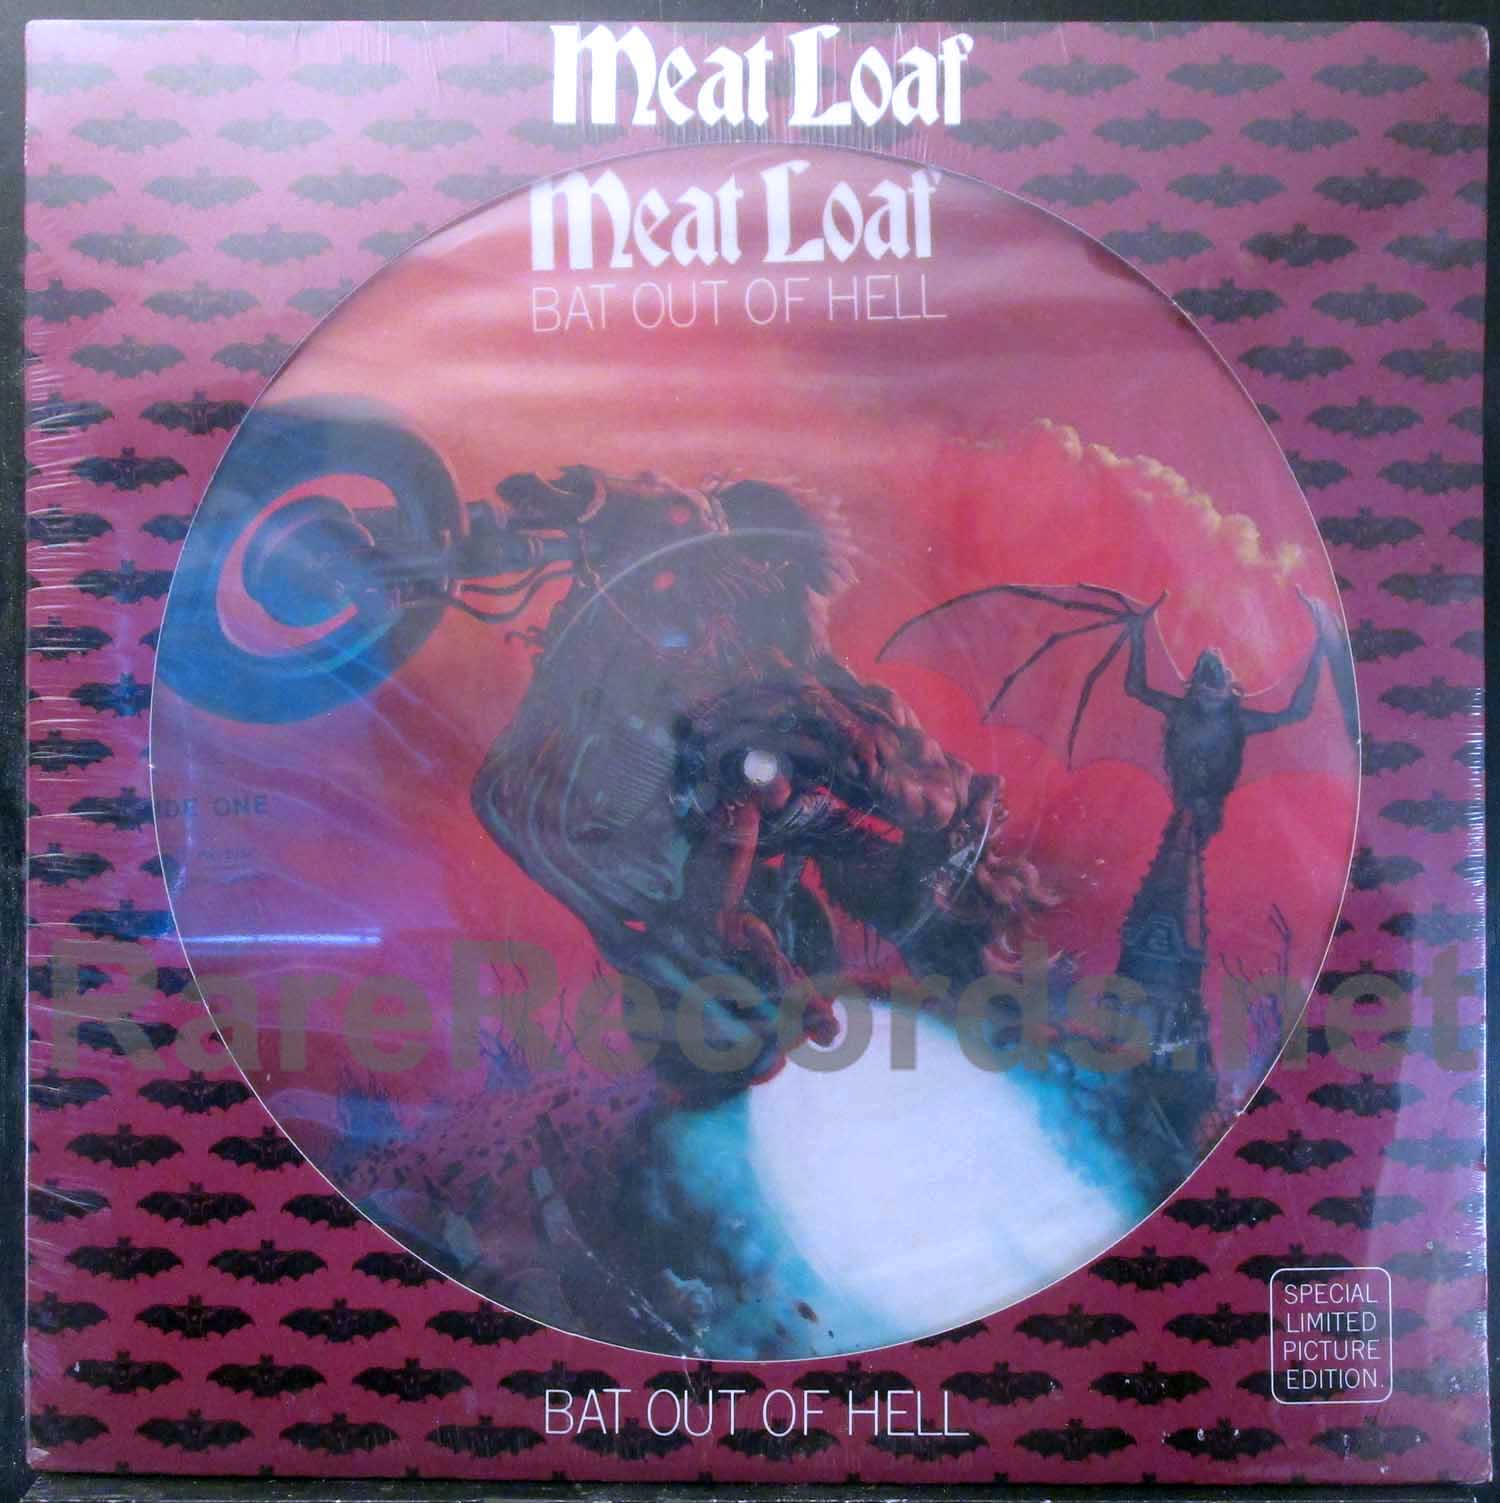 Meat Loaf - Bat Out of Hell U.S. picture disc LP